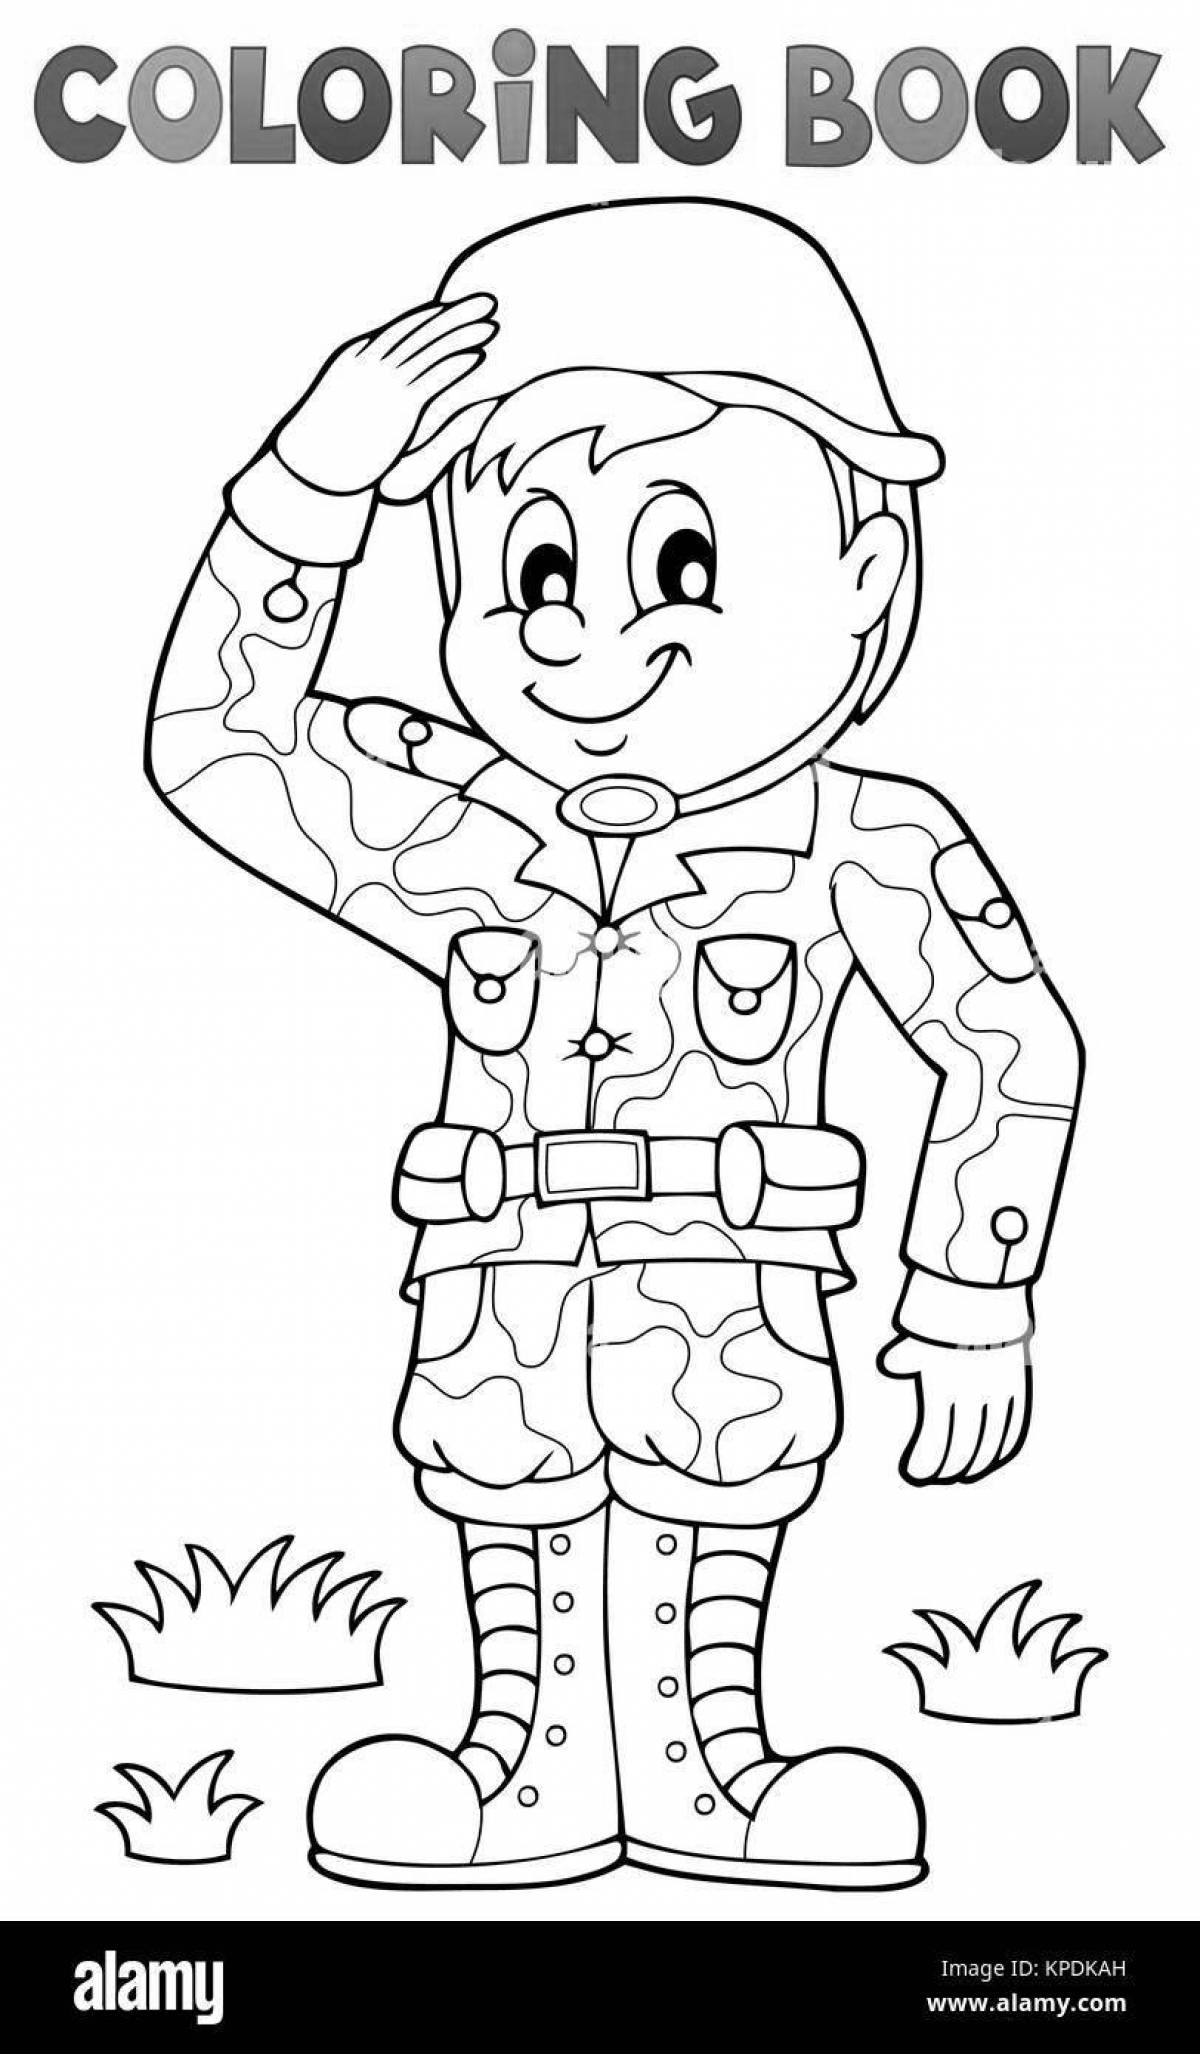 Colorful toy soldiers coloring pages for boys